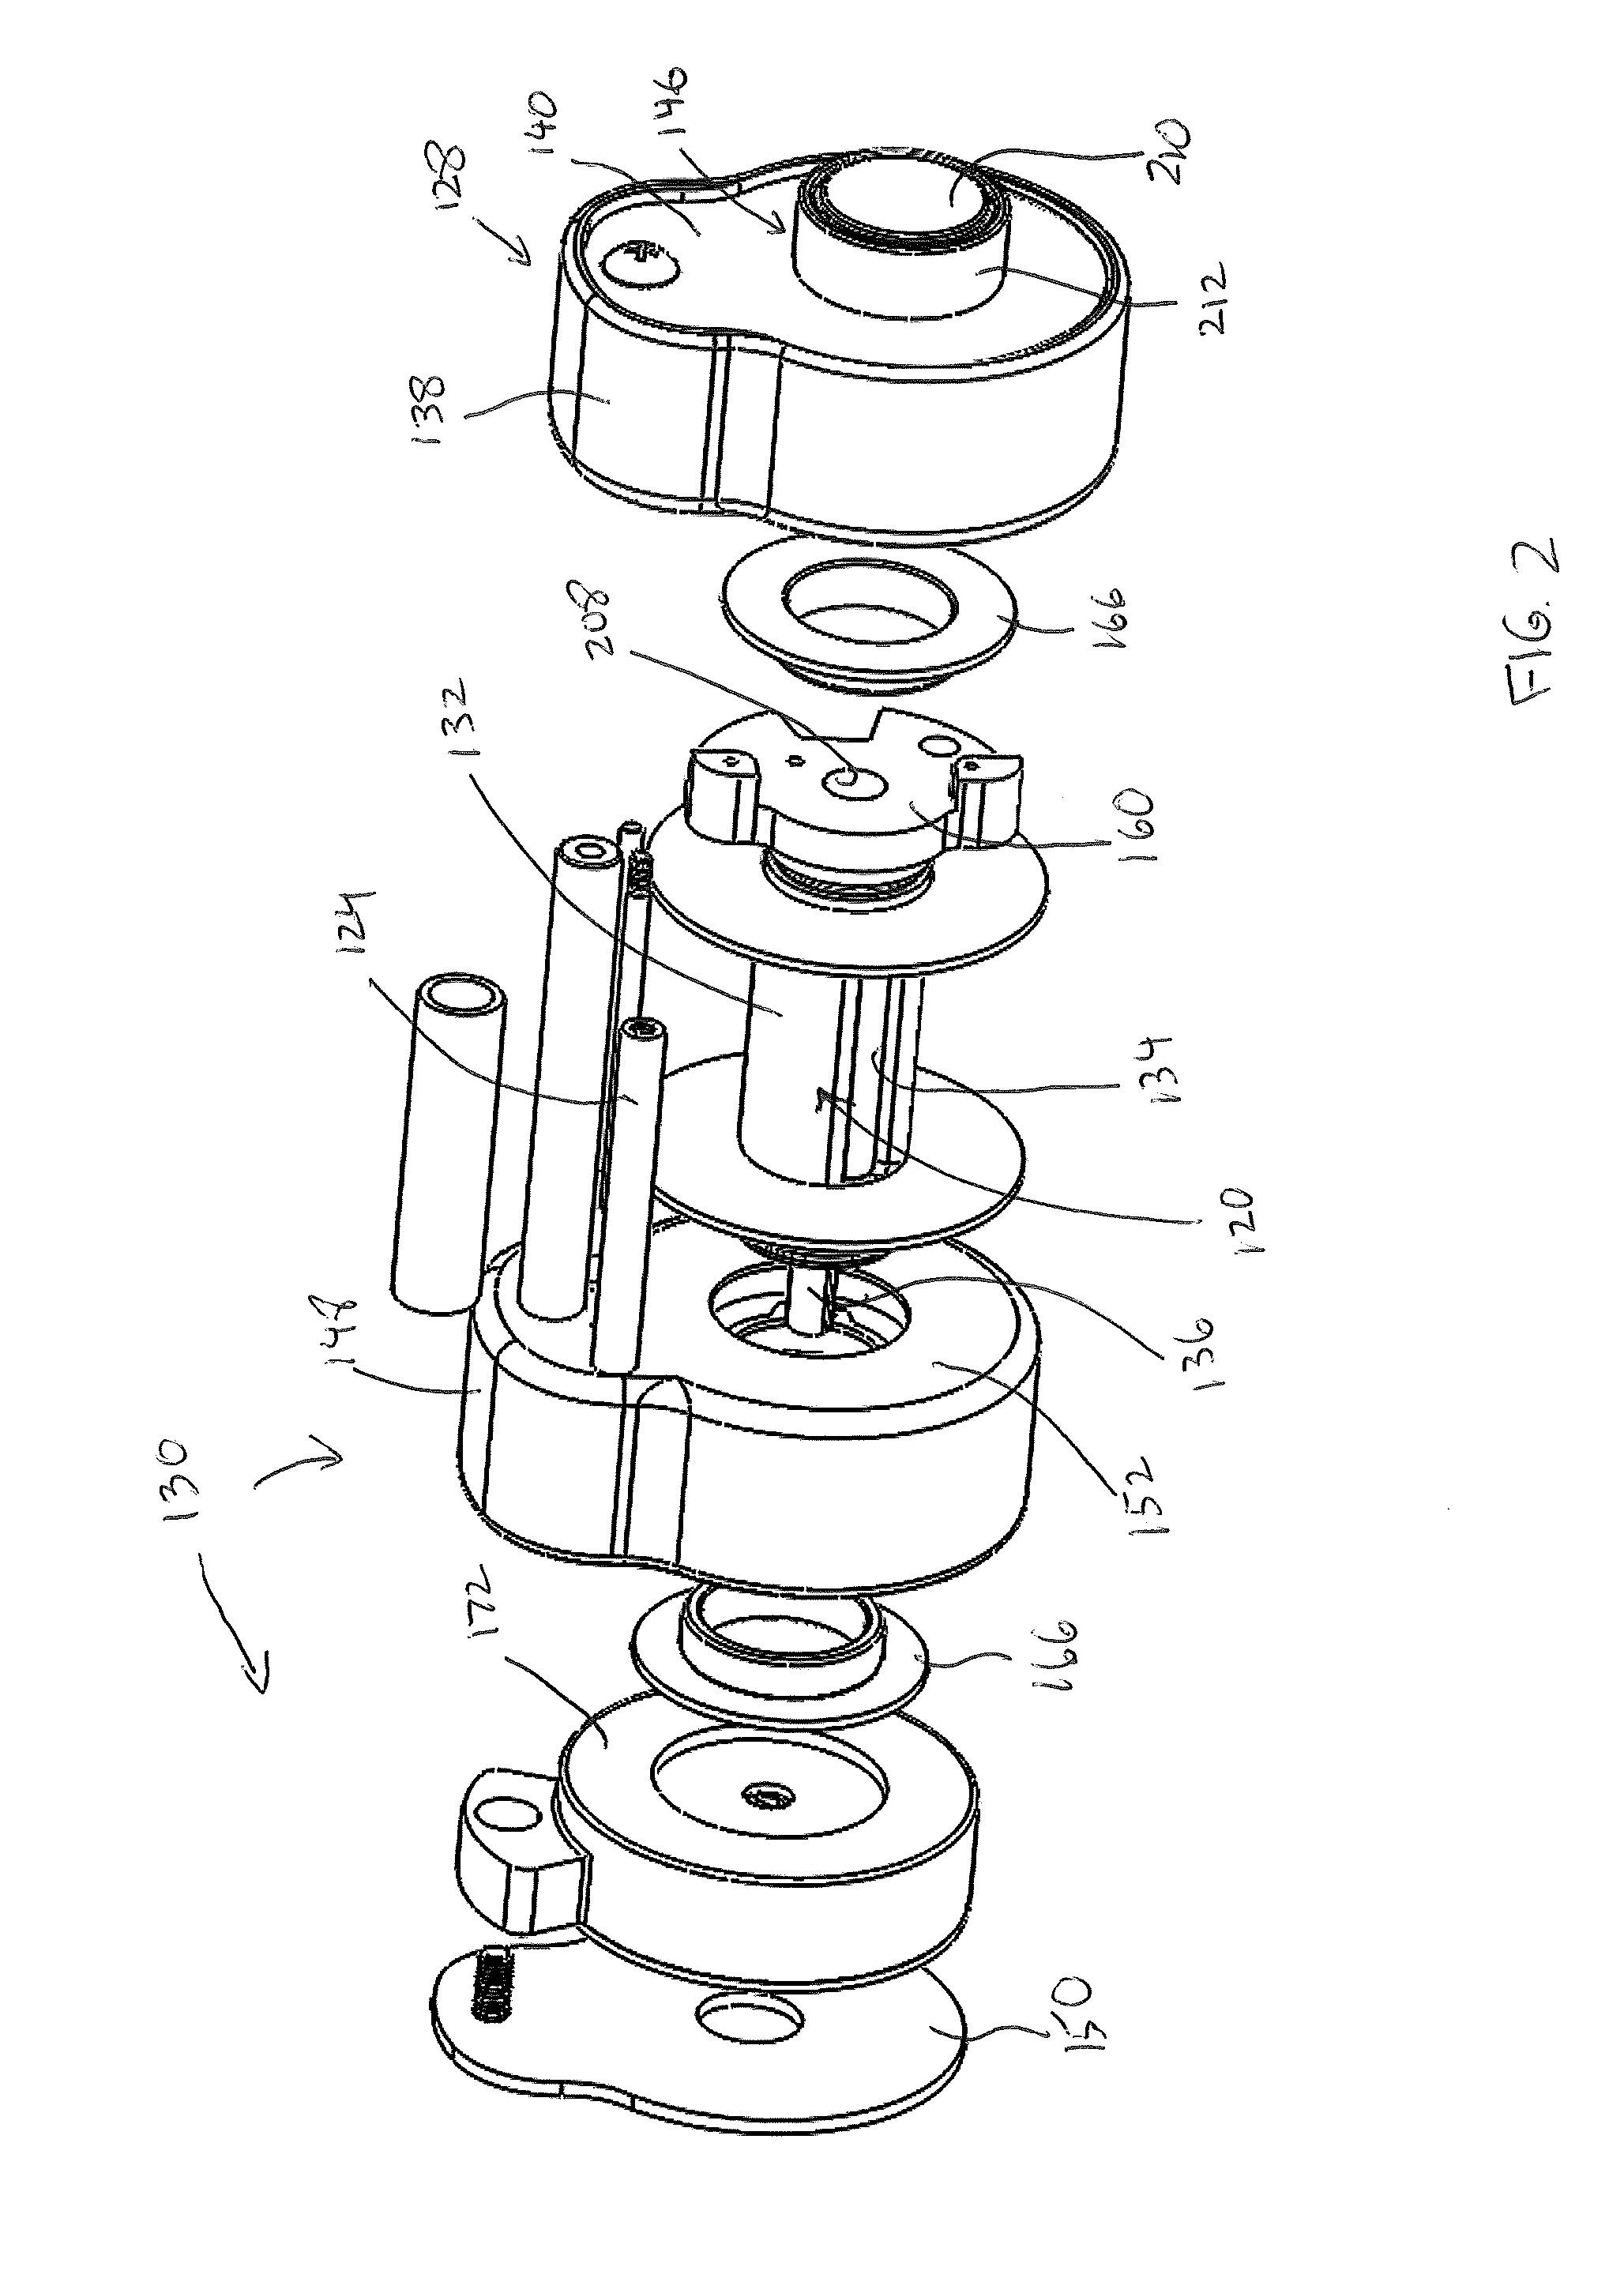 Mechanically Actuated Cargo Restraint System